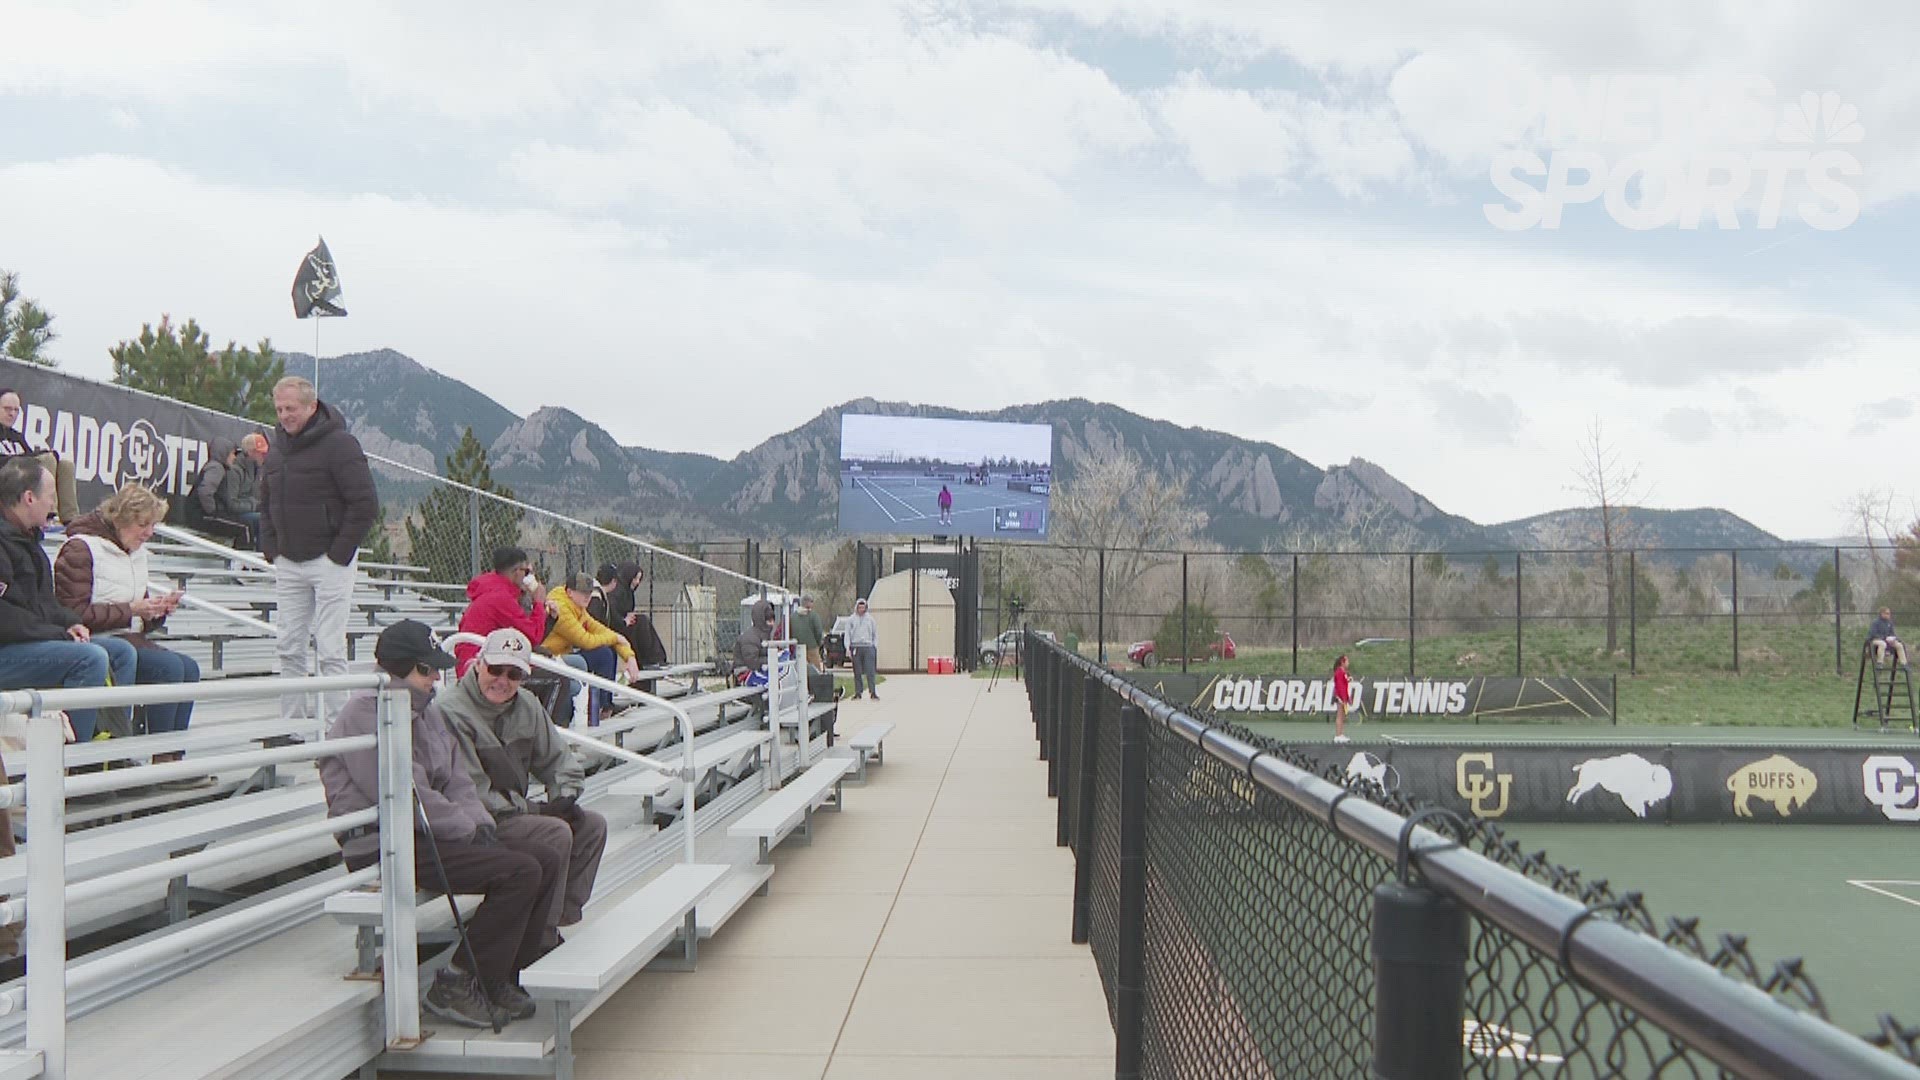 CU tennis star Toni Balzert finally got the chance to show off her skills in front of her parents, who traveled nearly 5,000 miles to watch her play.